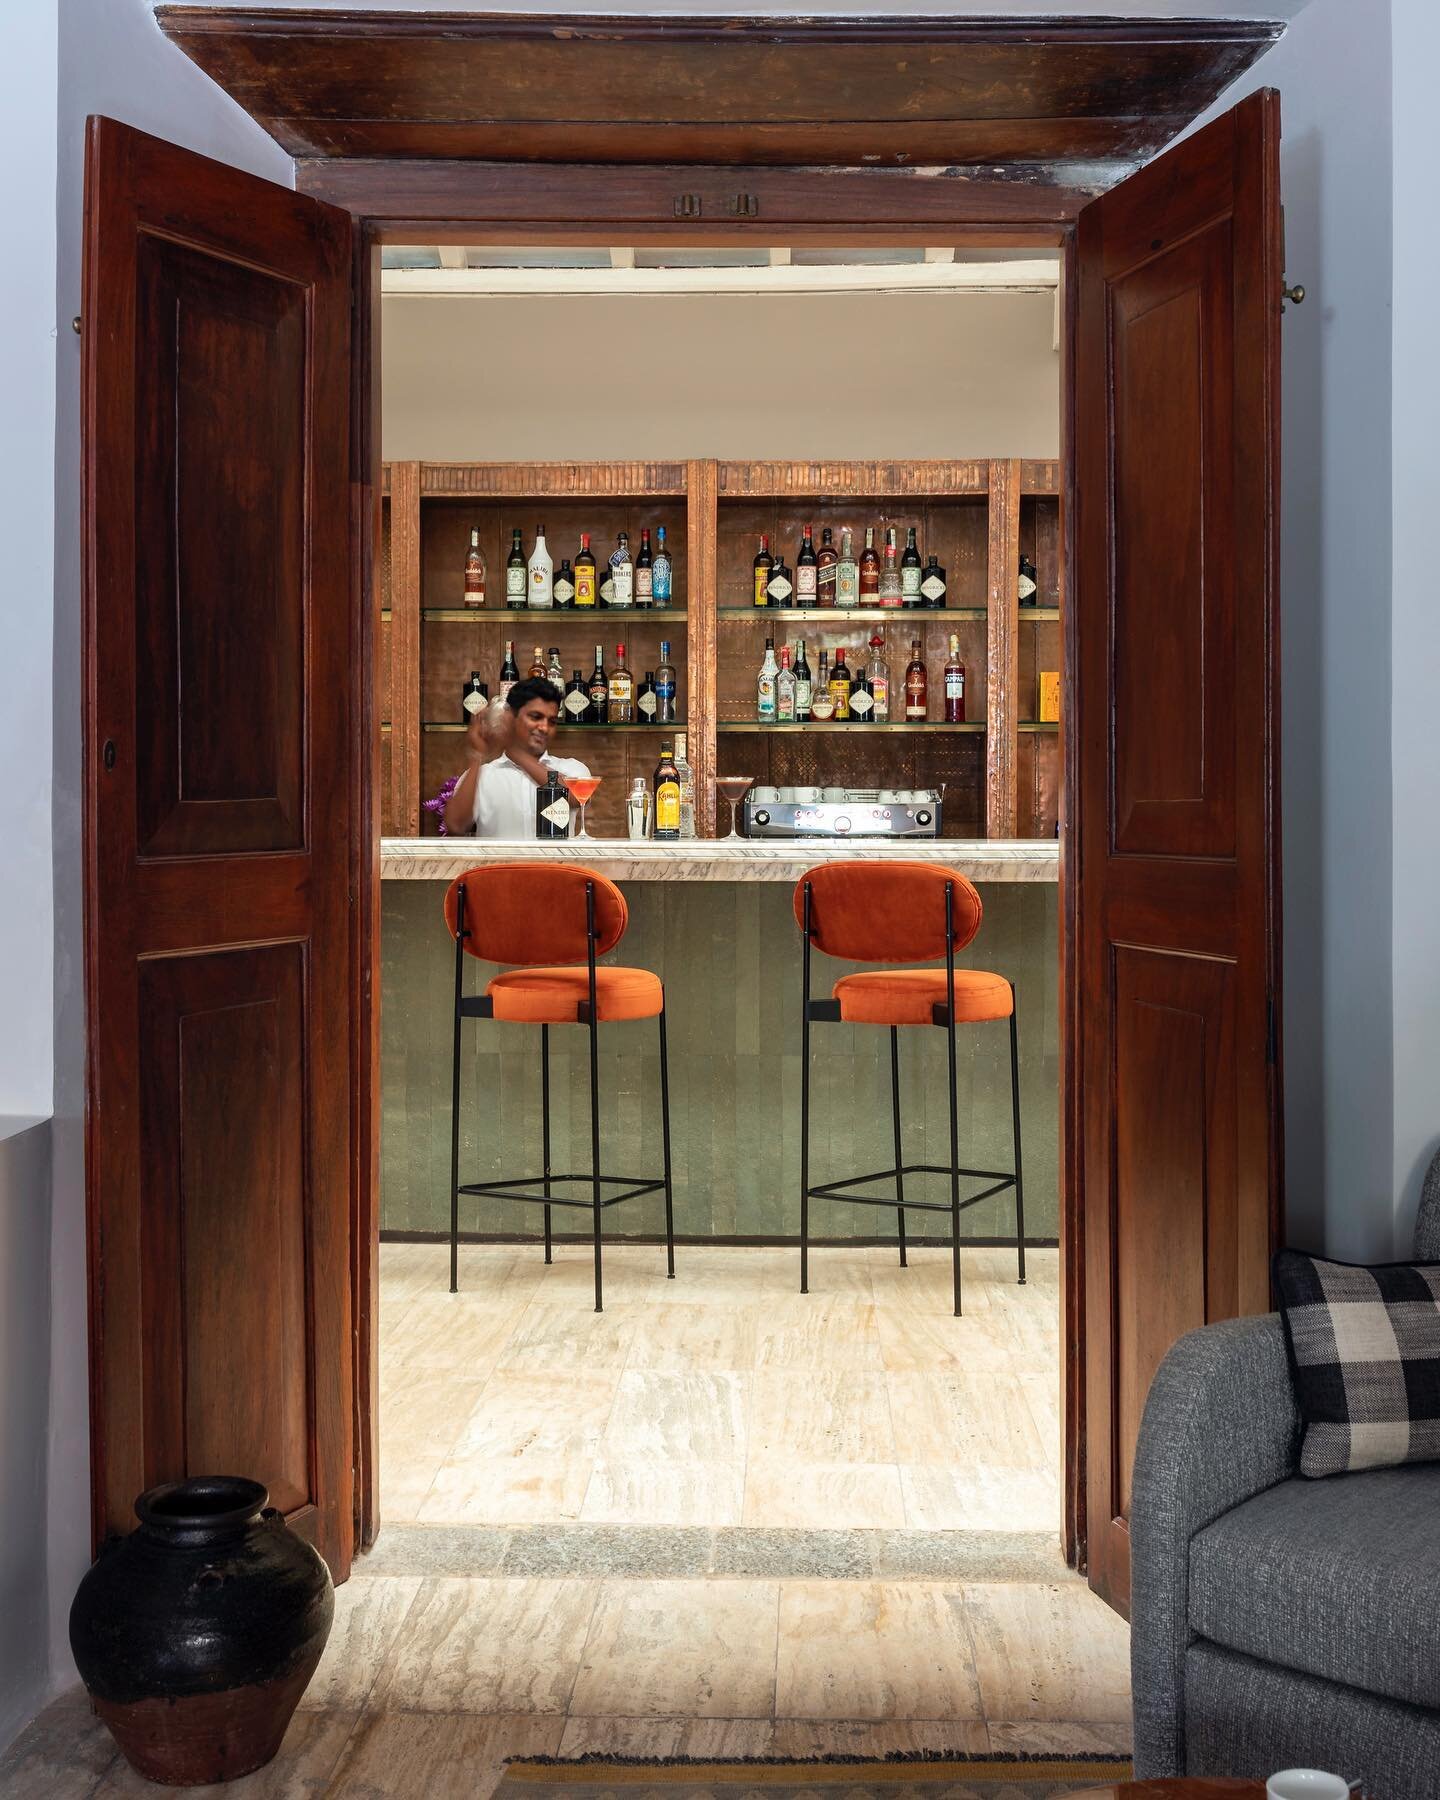 Sneak peak through these stunning traditional timber doors through to our copper and limestone cladded bar. Image courtesy @fwalkerarnottphotography